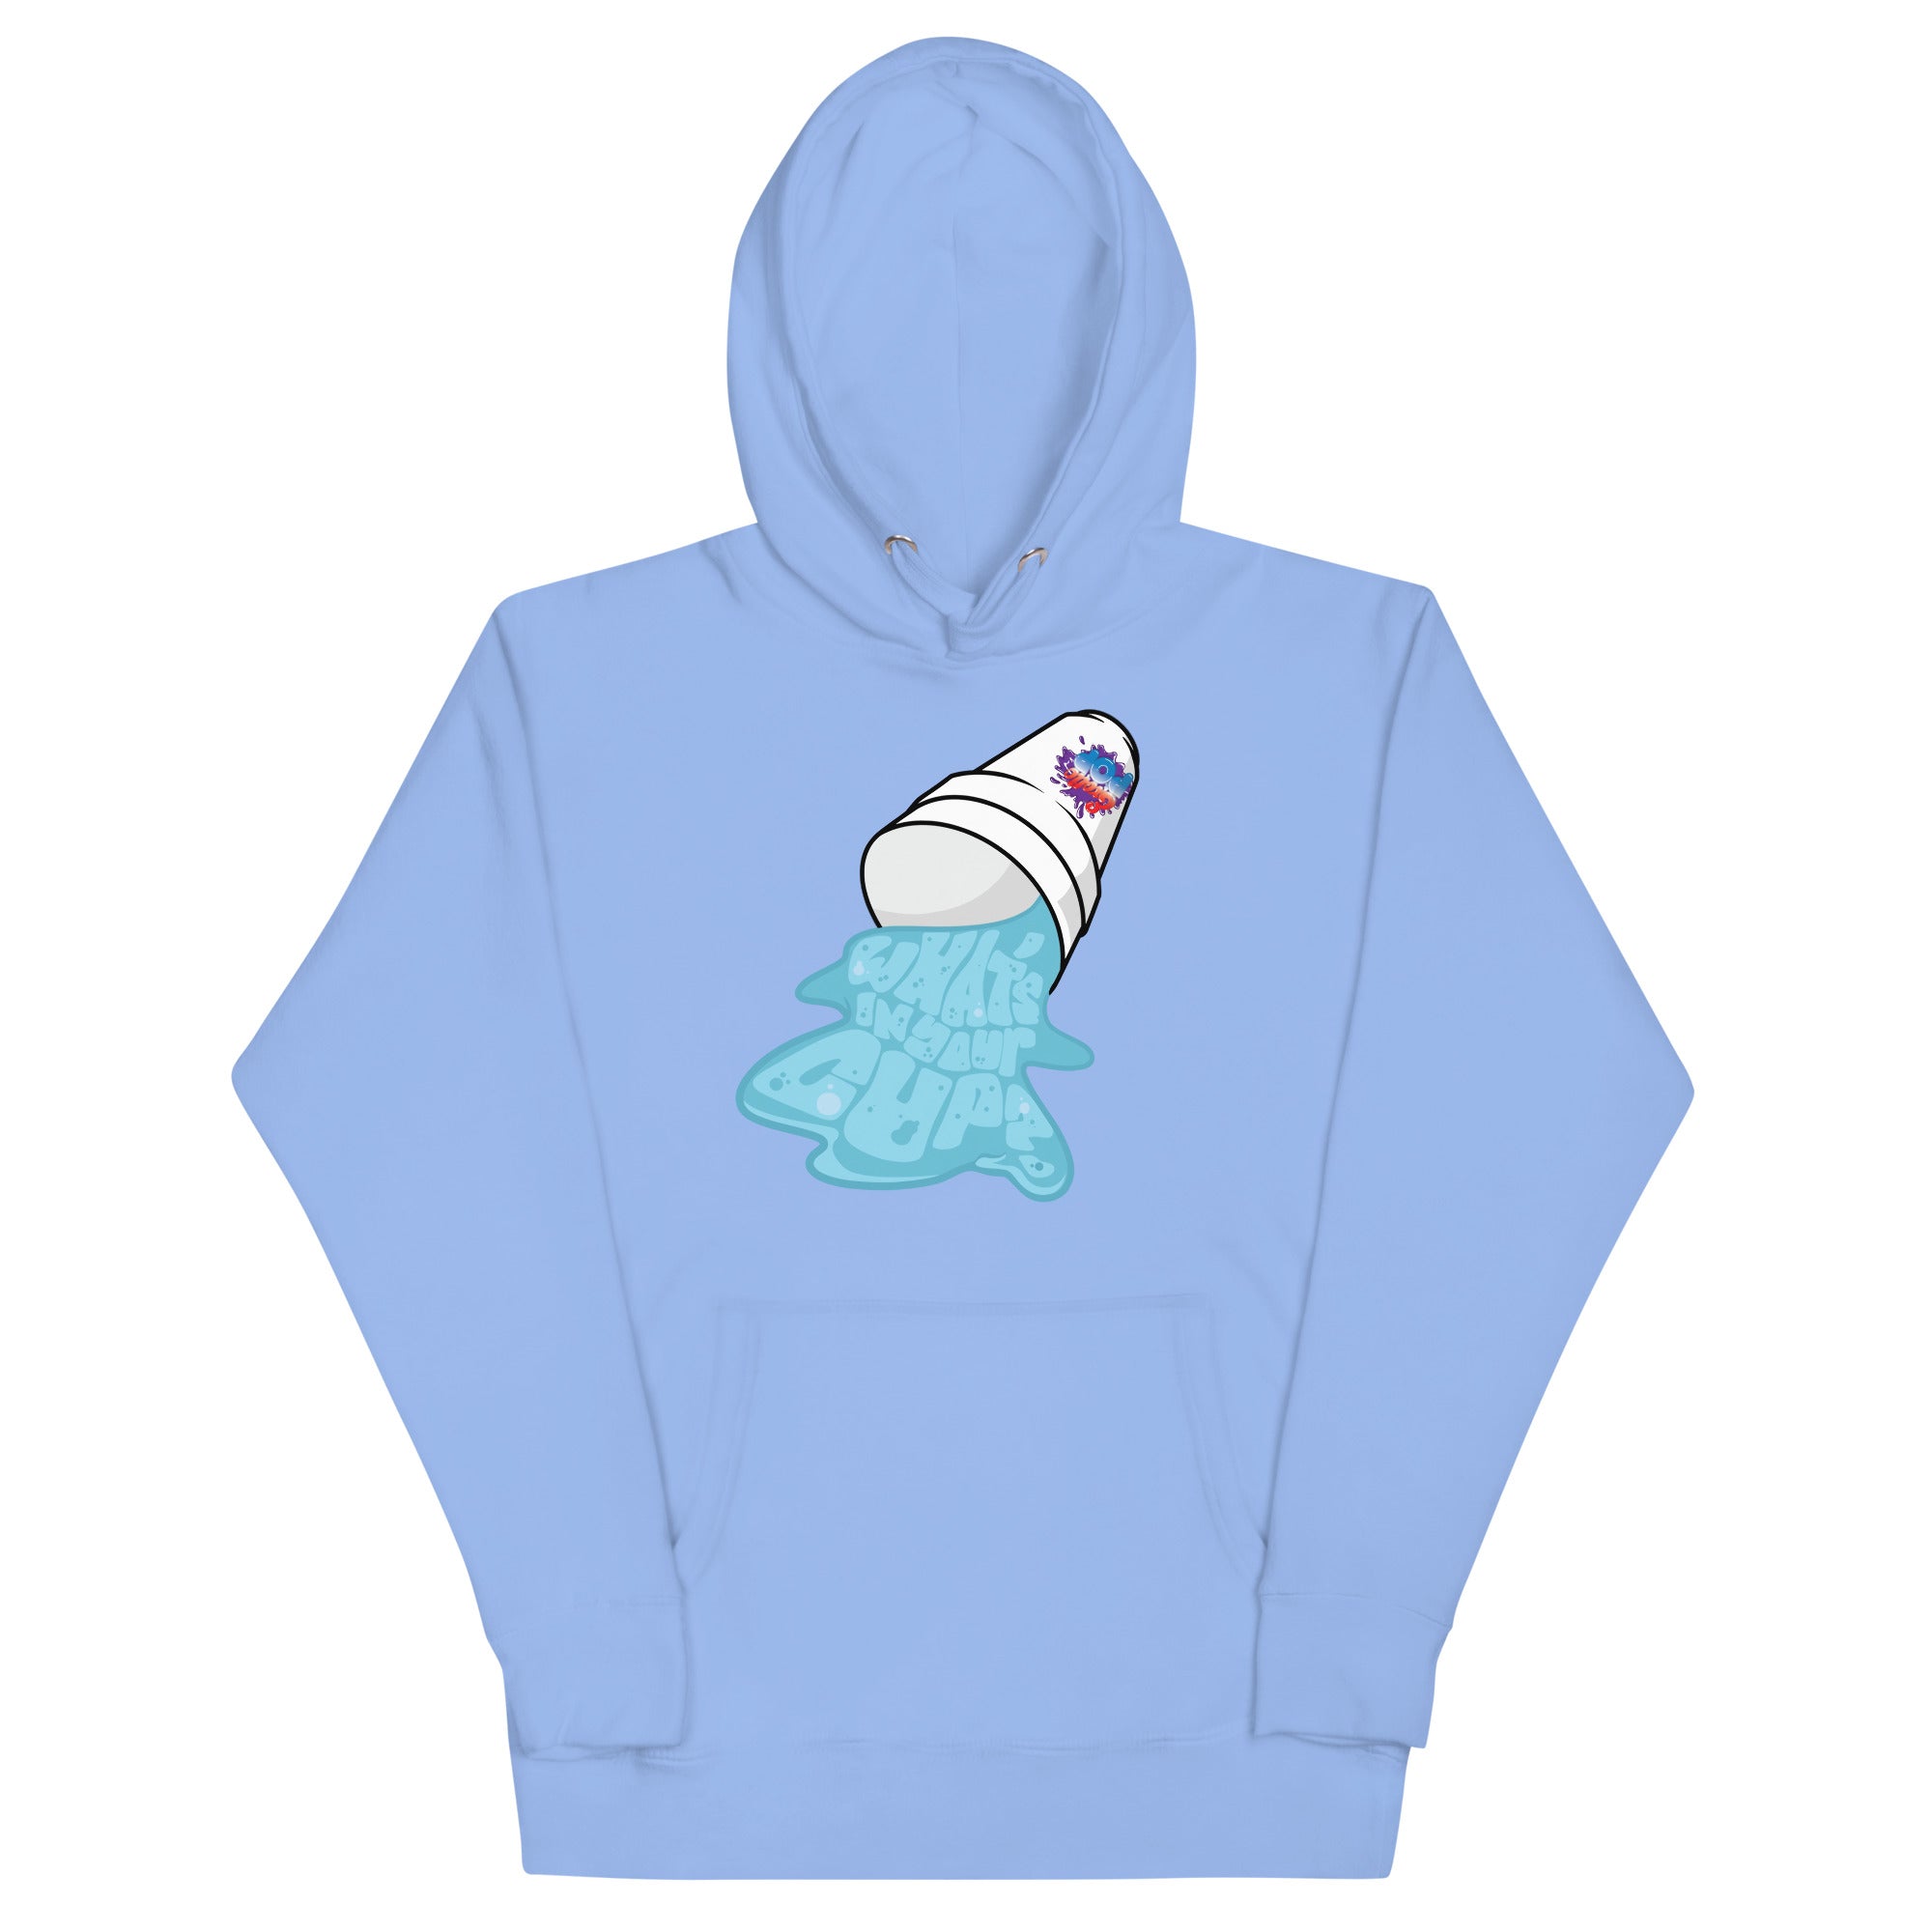 What's In Your Cup? Unisex Hoodie